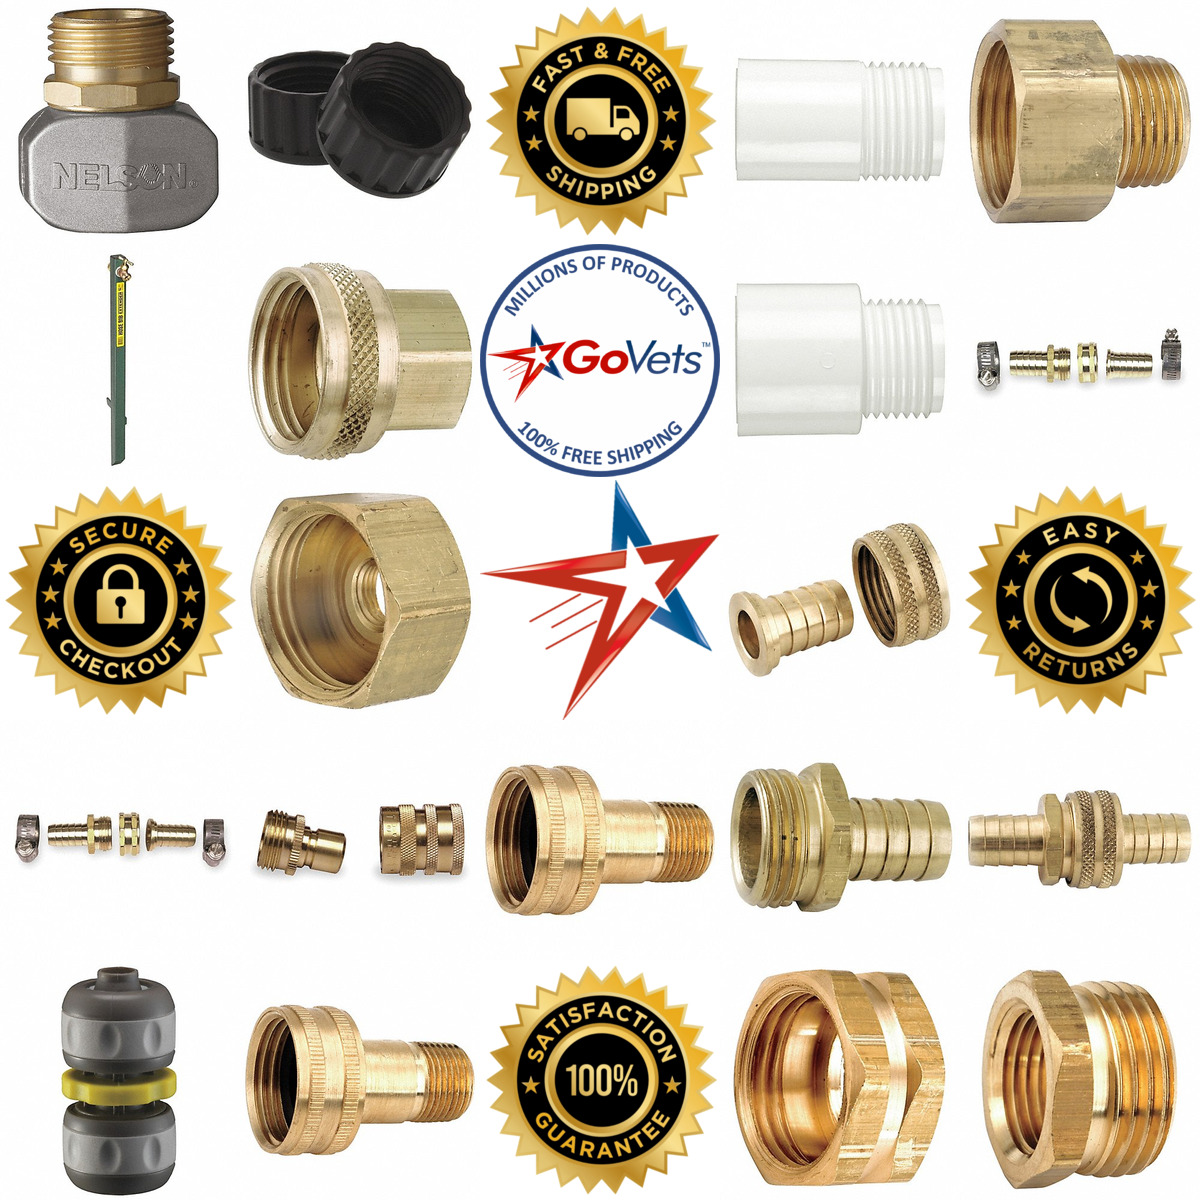 A selection of Garden Hose Fittings and Couplings products on GoVets